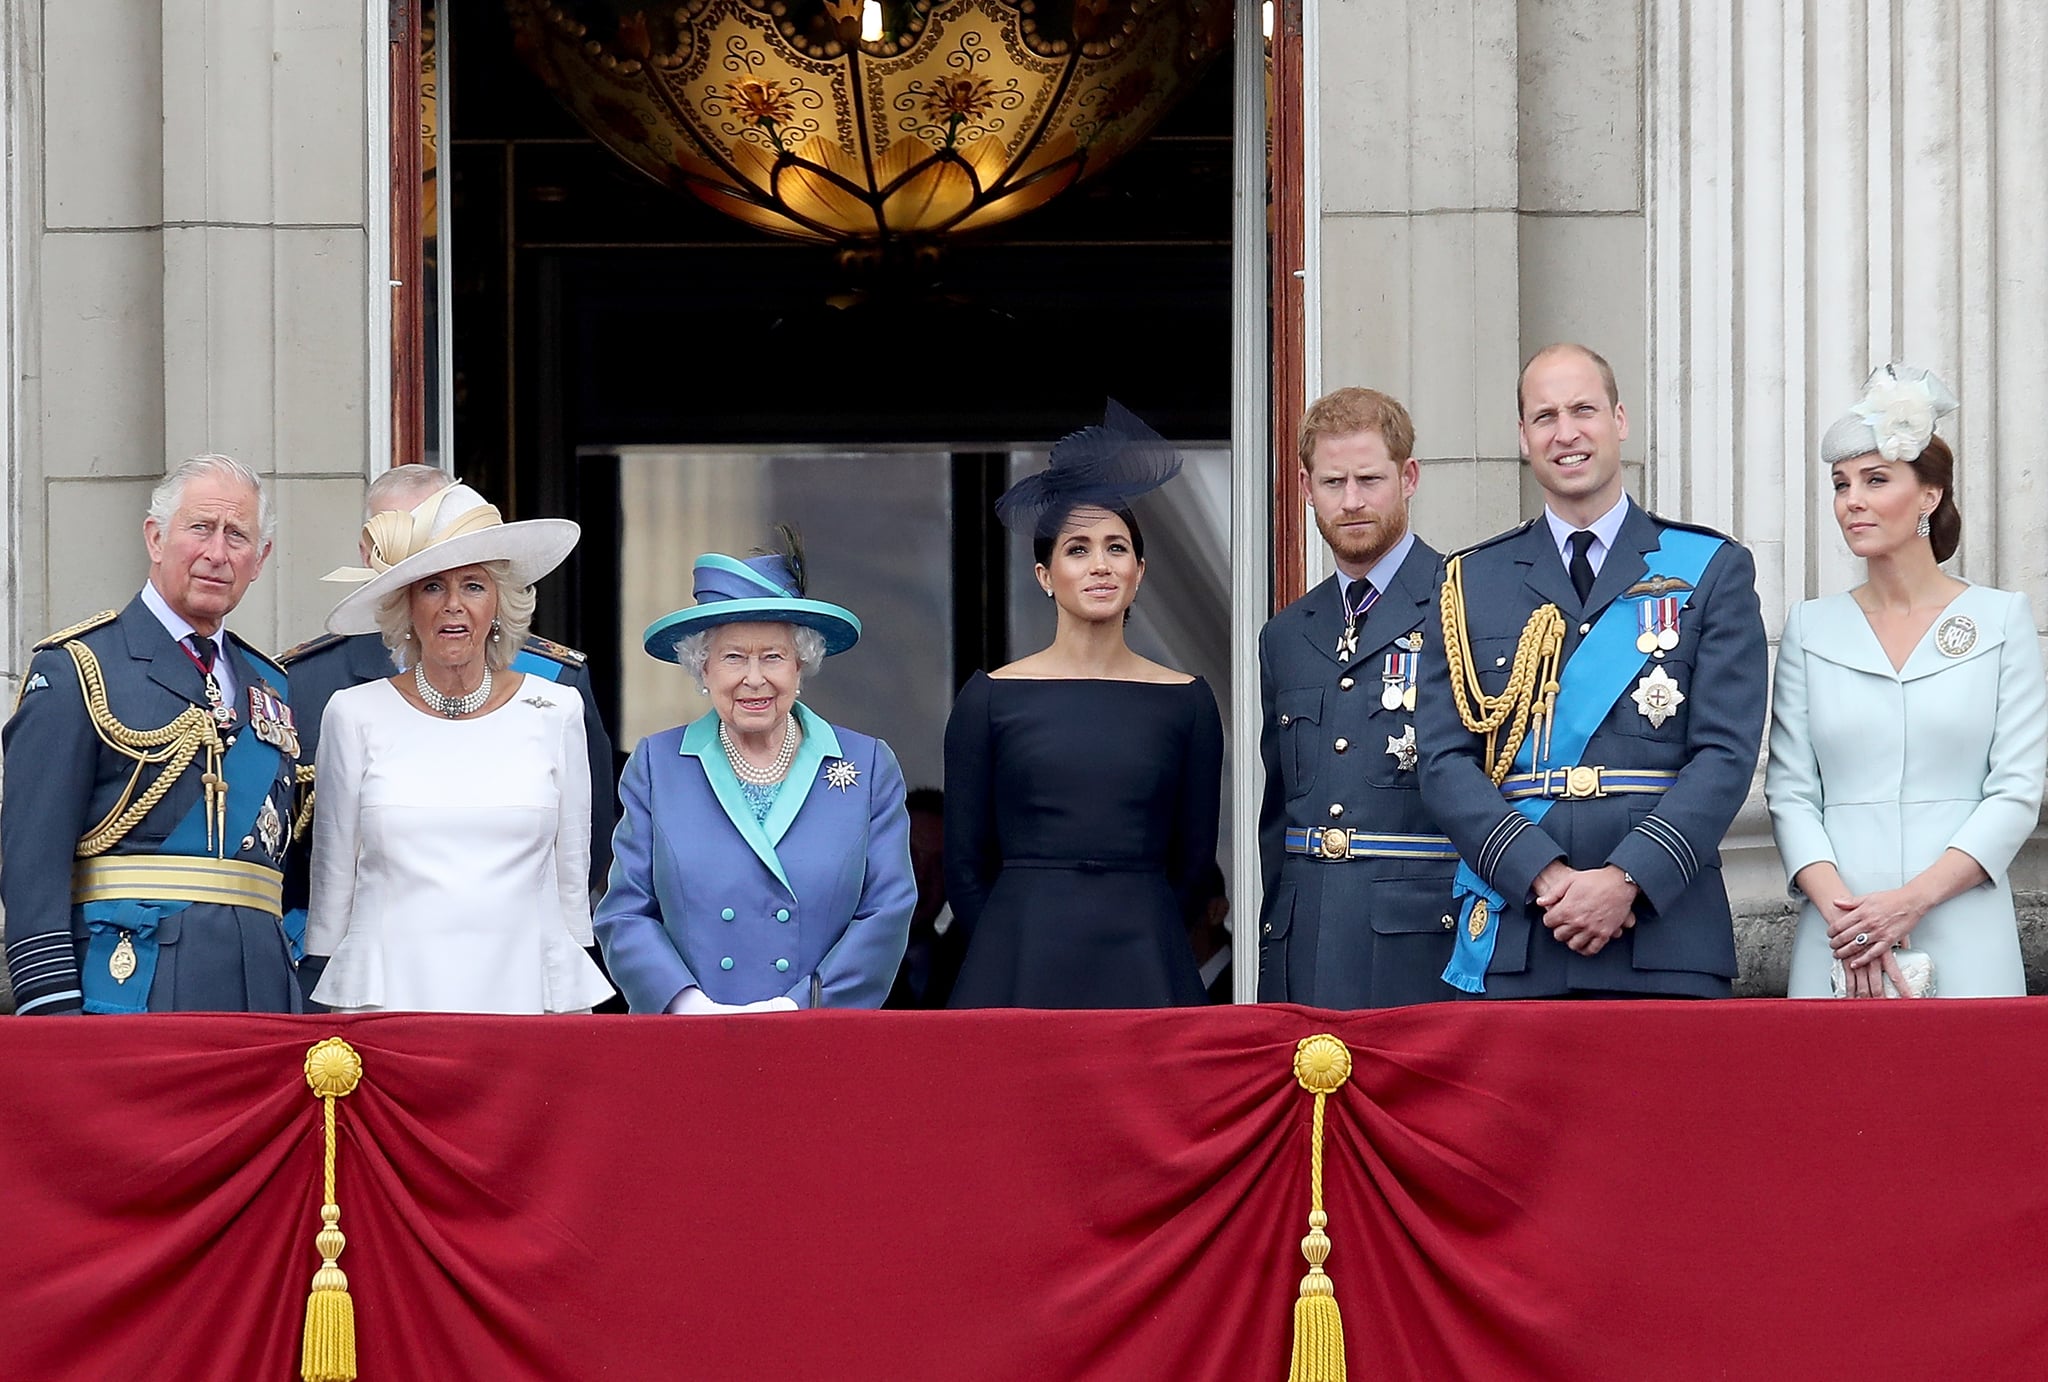 LONDON, ENGLAND - JULY 10:  (L-R)  Prince Charles, Prince of Wales, Camilla, Duchess of Cornwall, Queen Elizabeth II, Meghan, Duchess of Sussex, Prince Harry, Duke of Sussex, Prince William, Duke of Cambridge and Catherine, Duchess of Cambridge watch the RAF flypast on the balcony of Buckingham Palace, as members of the Royal Family attend events to mark the centenary of the RAF on July 10, 2018 in London, England.  (Photo by Chris Jackson/Chris Jackson/Getty Images)